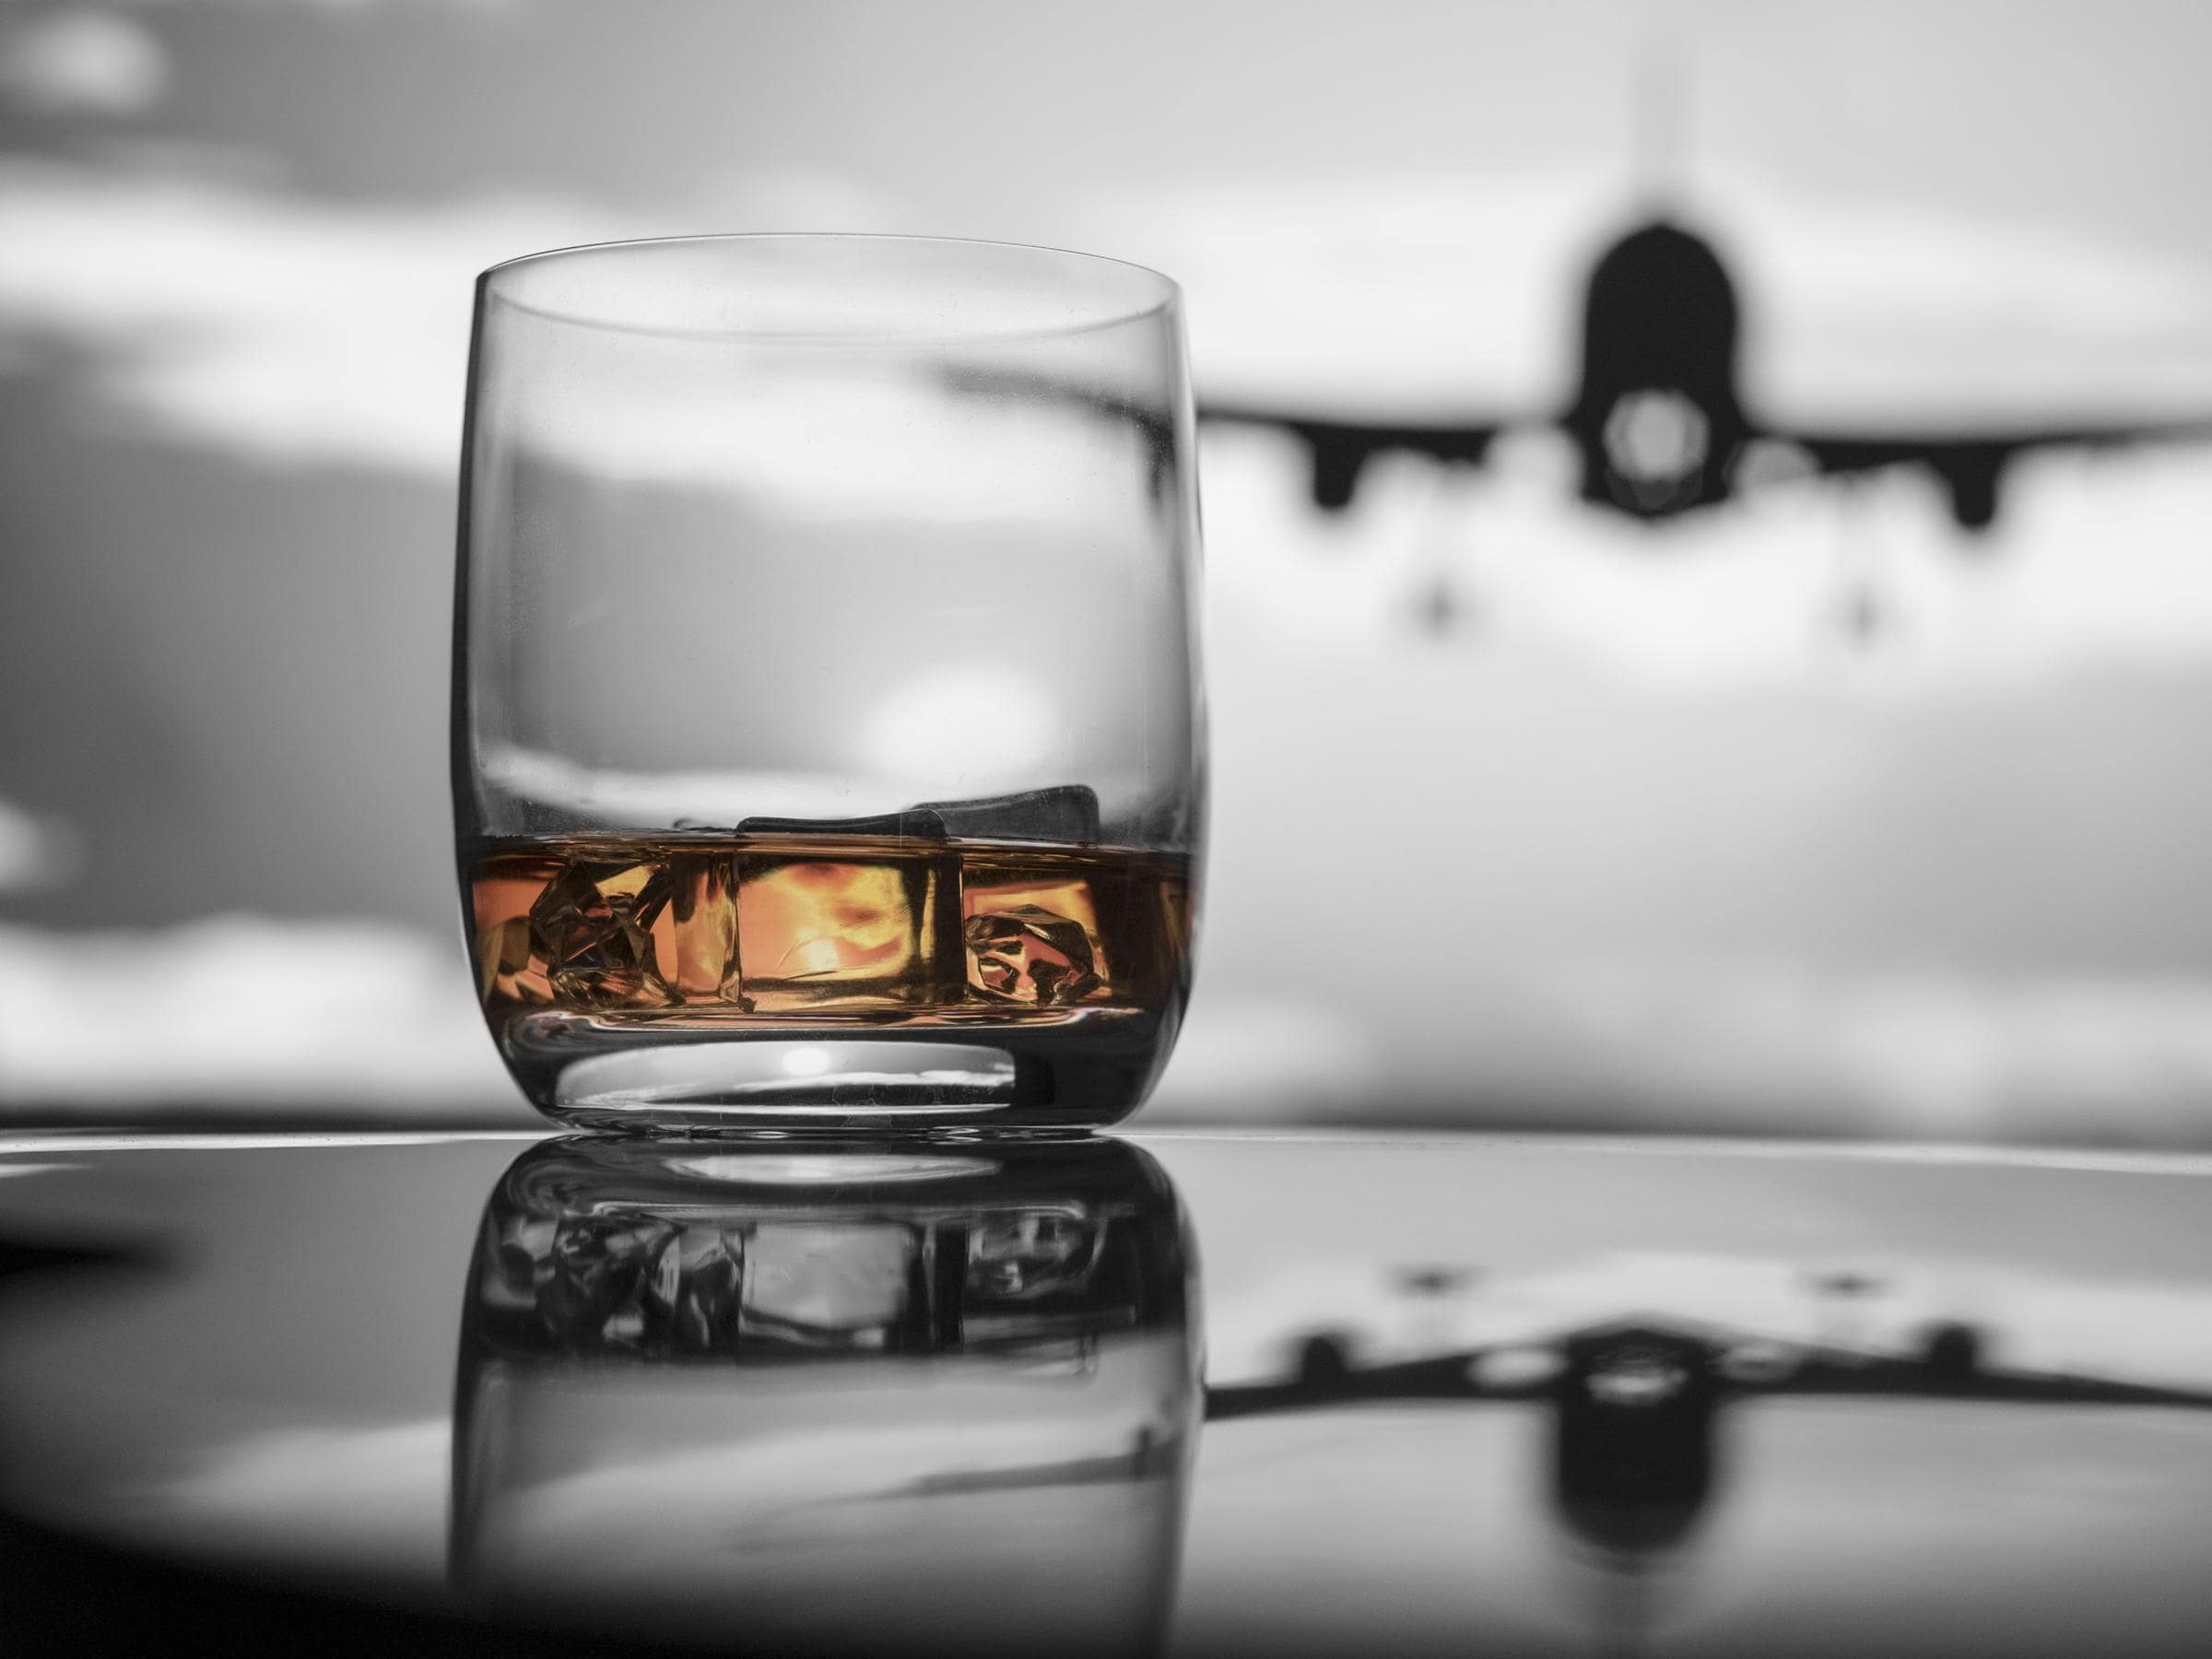 Why Skipping a Drink on Your Next Flight Might Be Your Best Move Study Shows Health Risks--